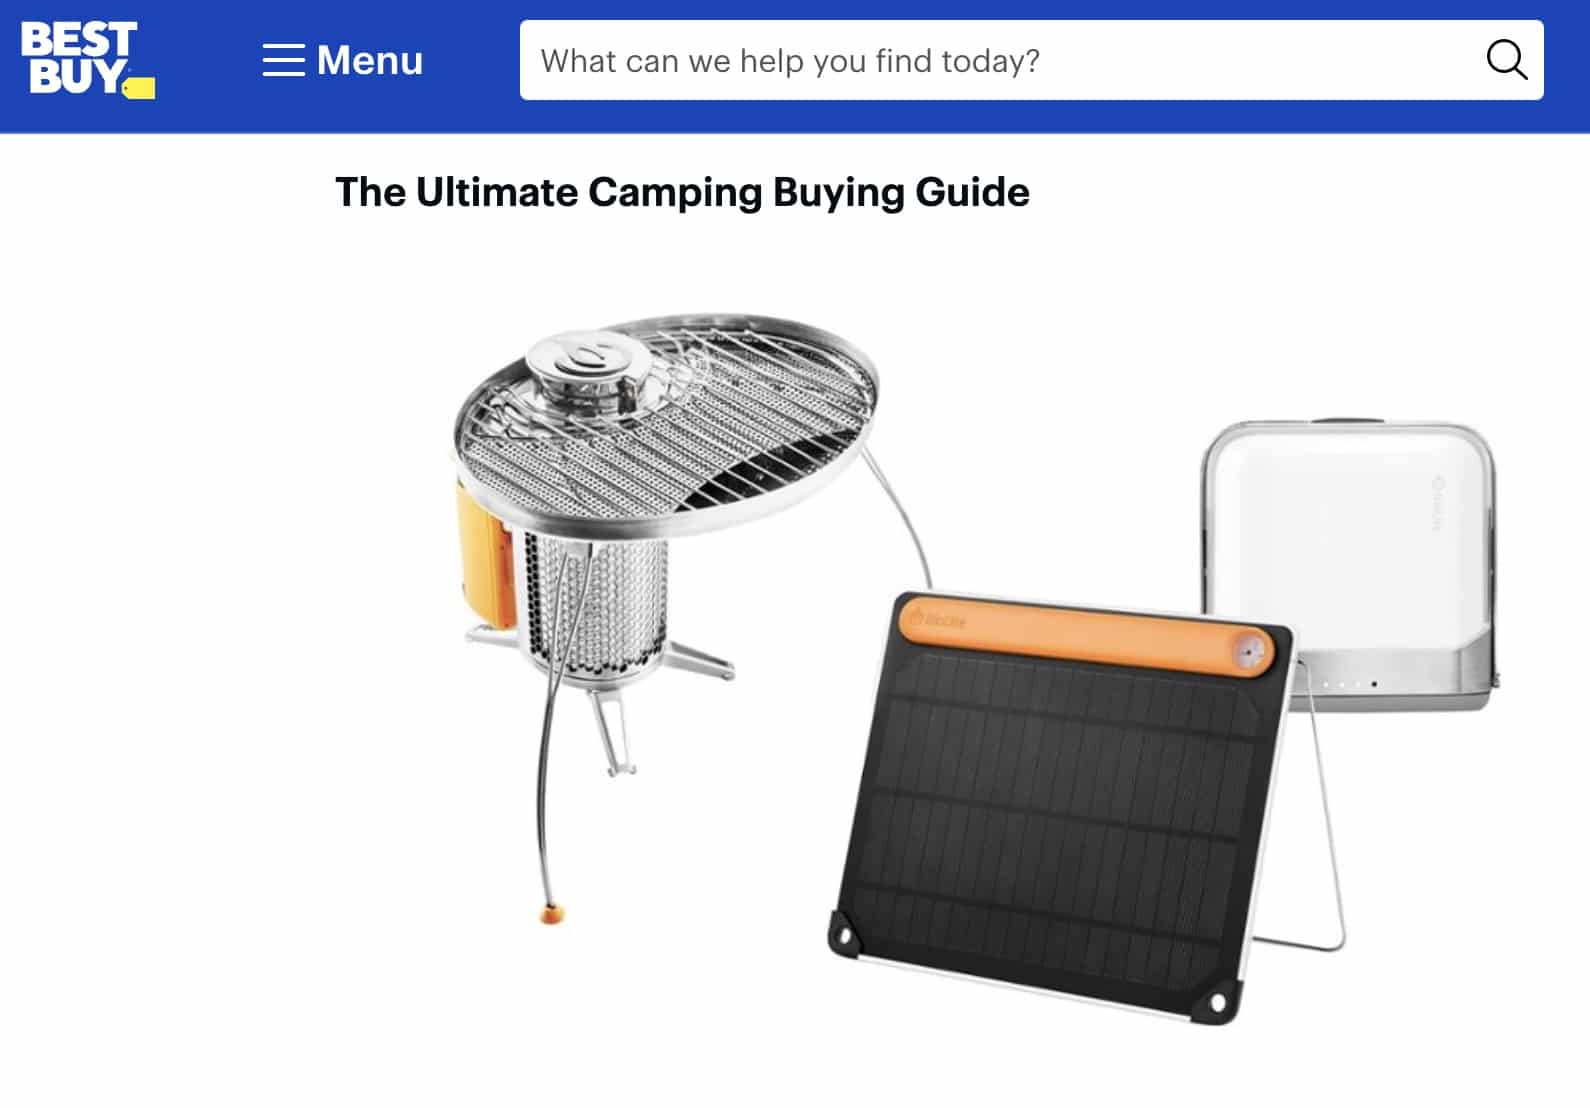 a camping gear guide from Best Buy